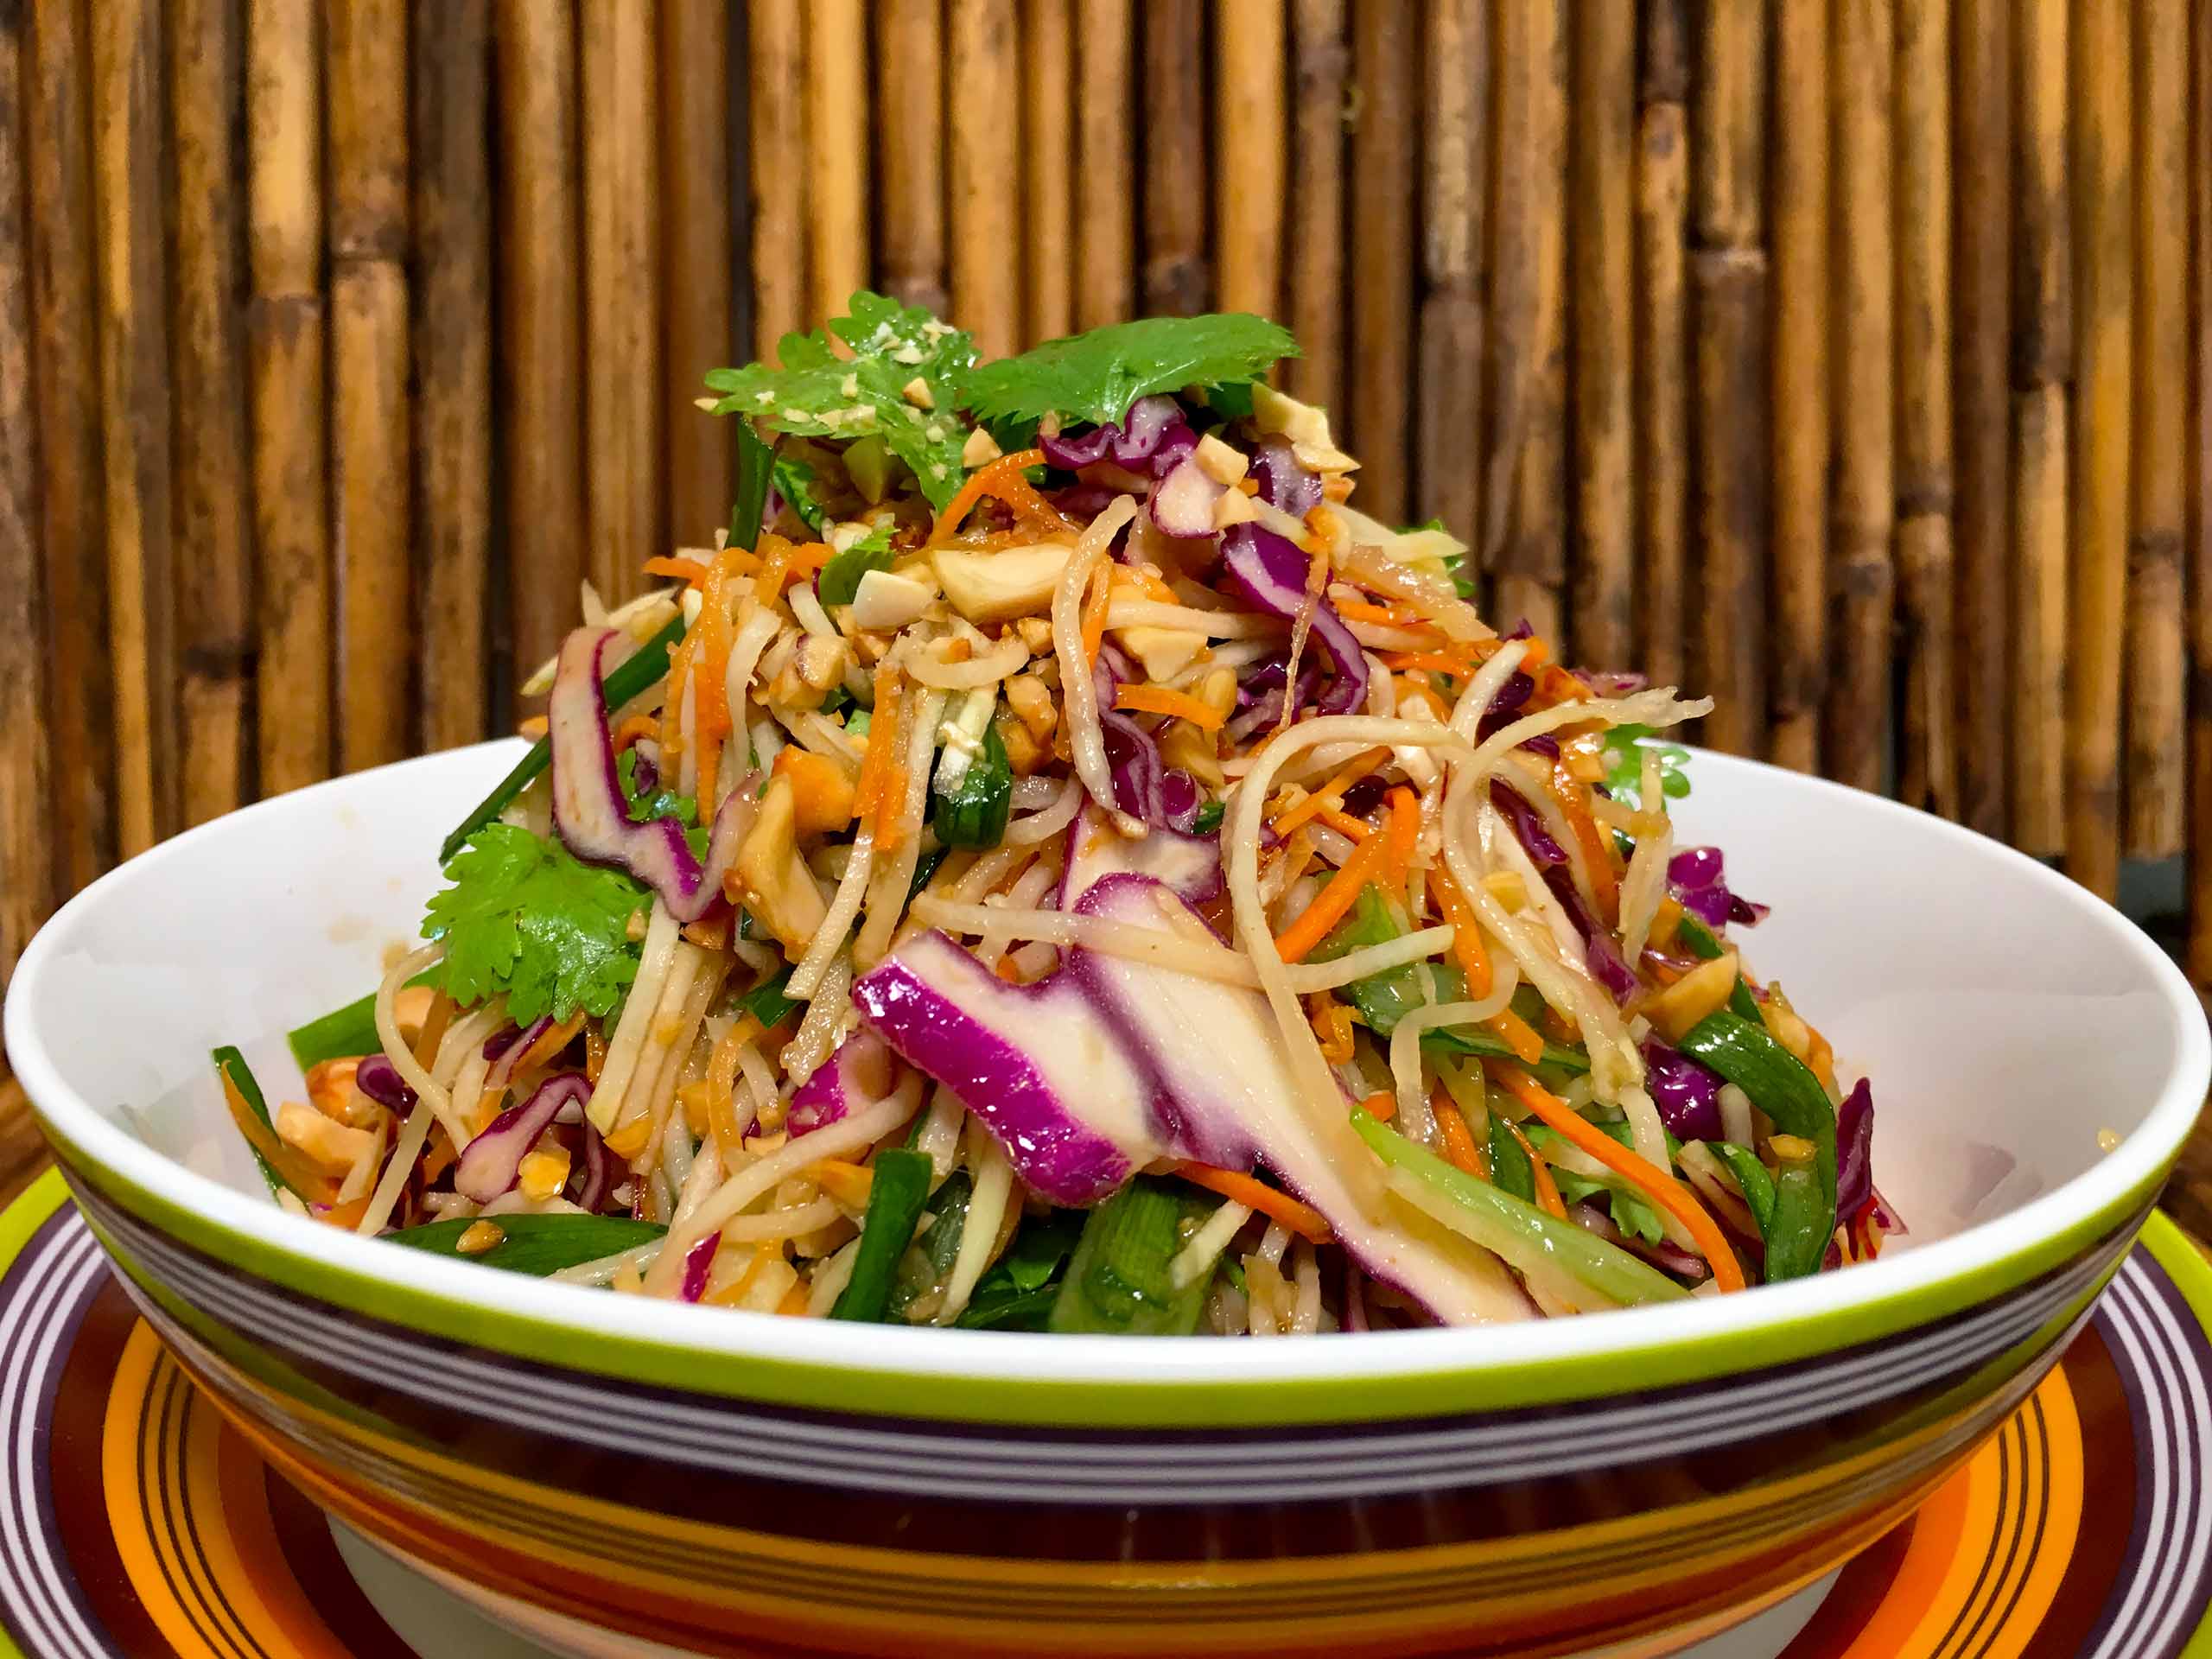 Asian style root salad – Crispy Crunchy and Full of Tastes